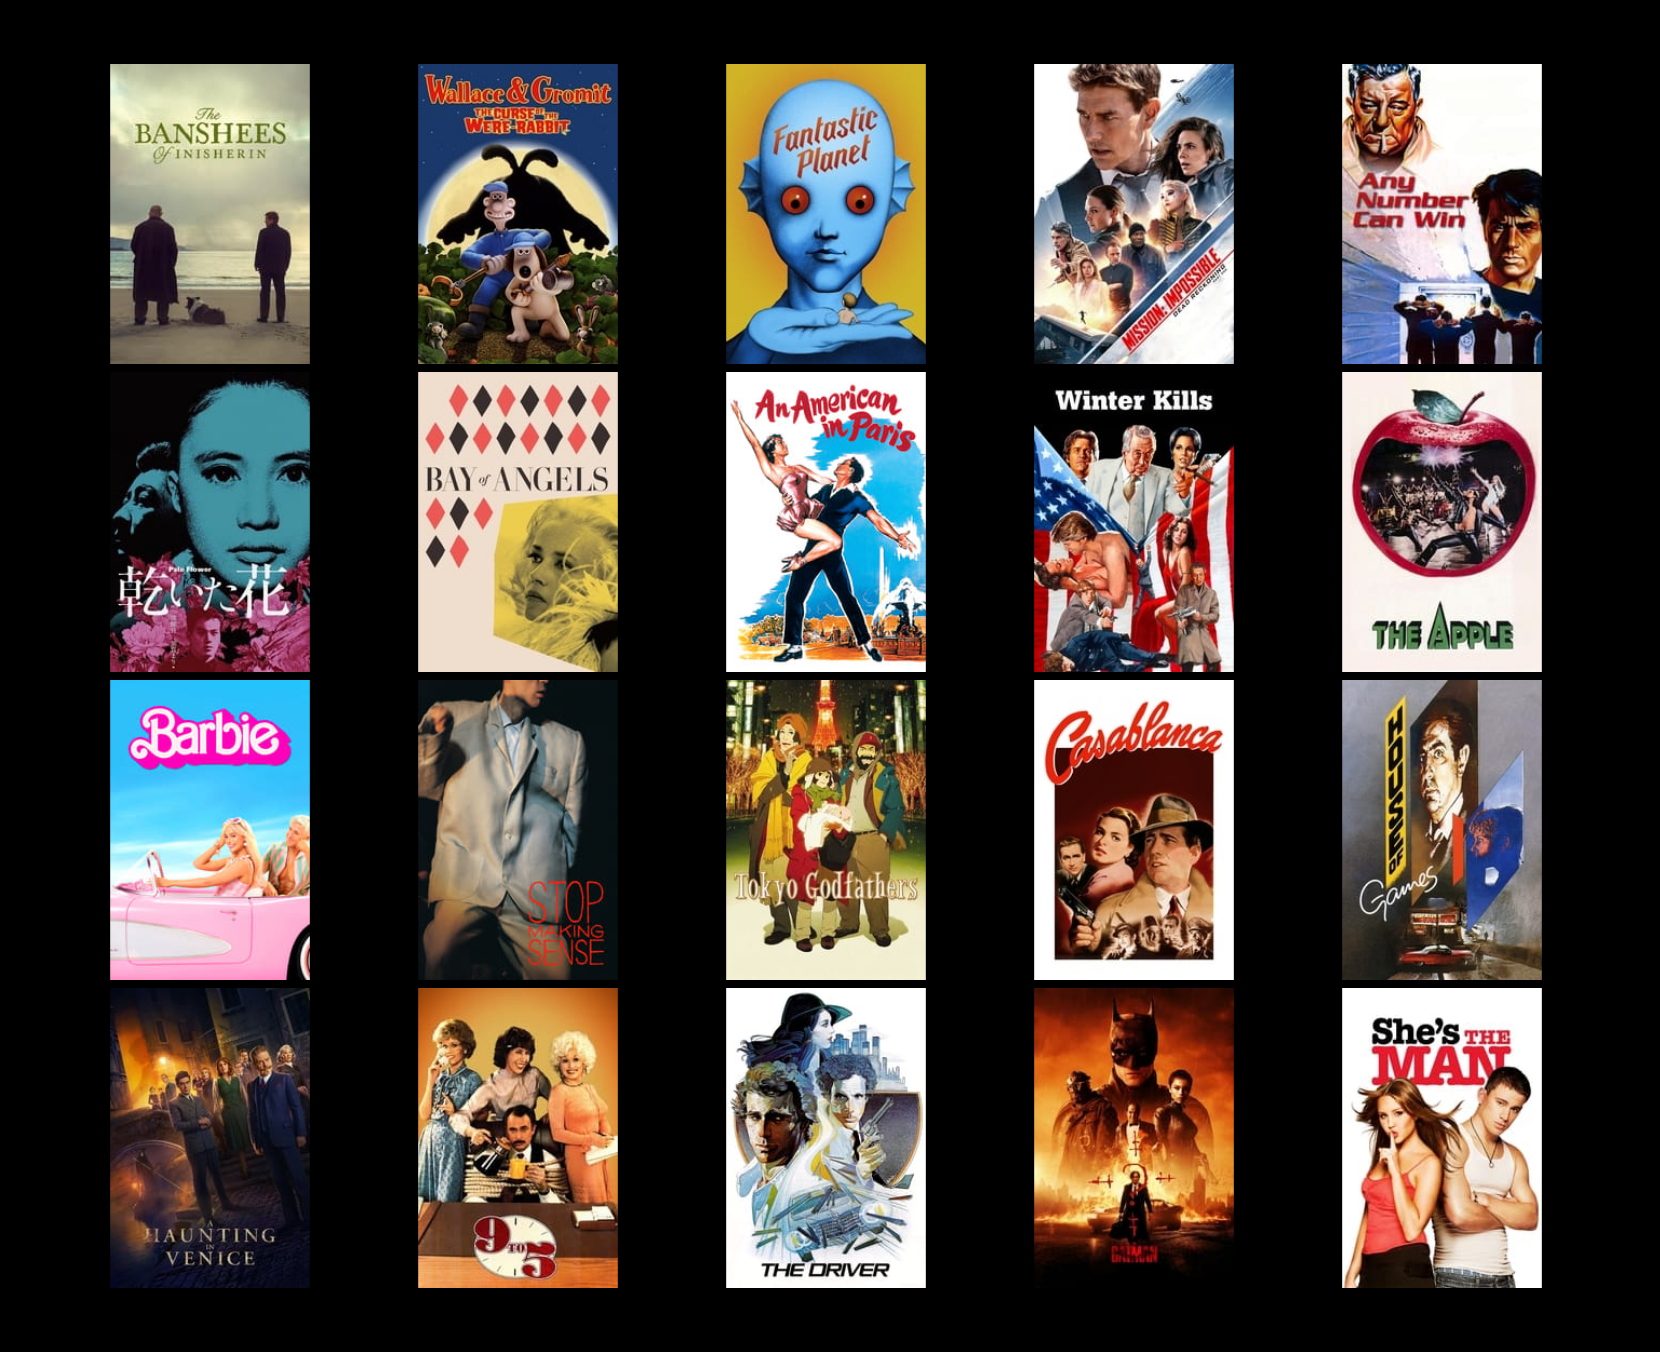 The movie posters of the movies listed below.